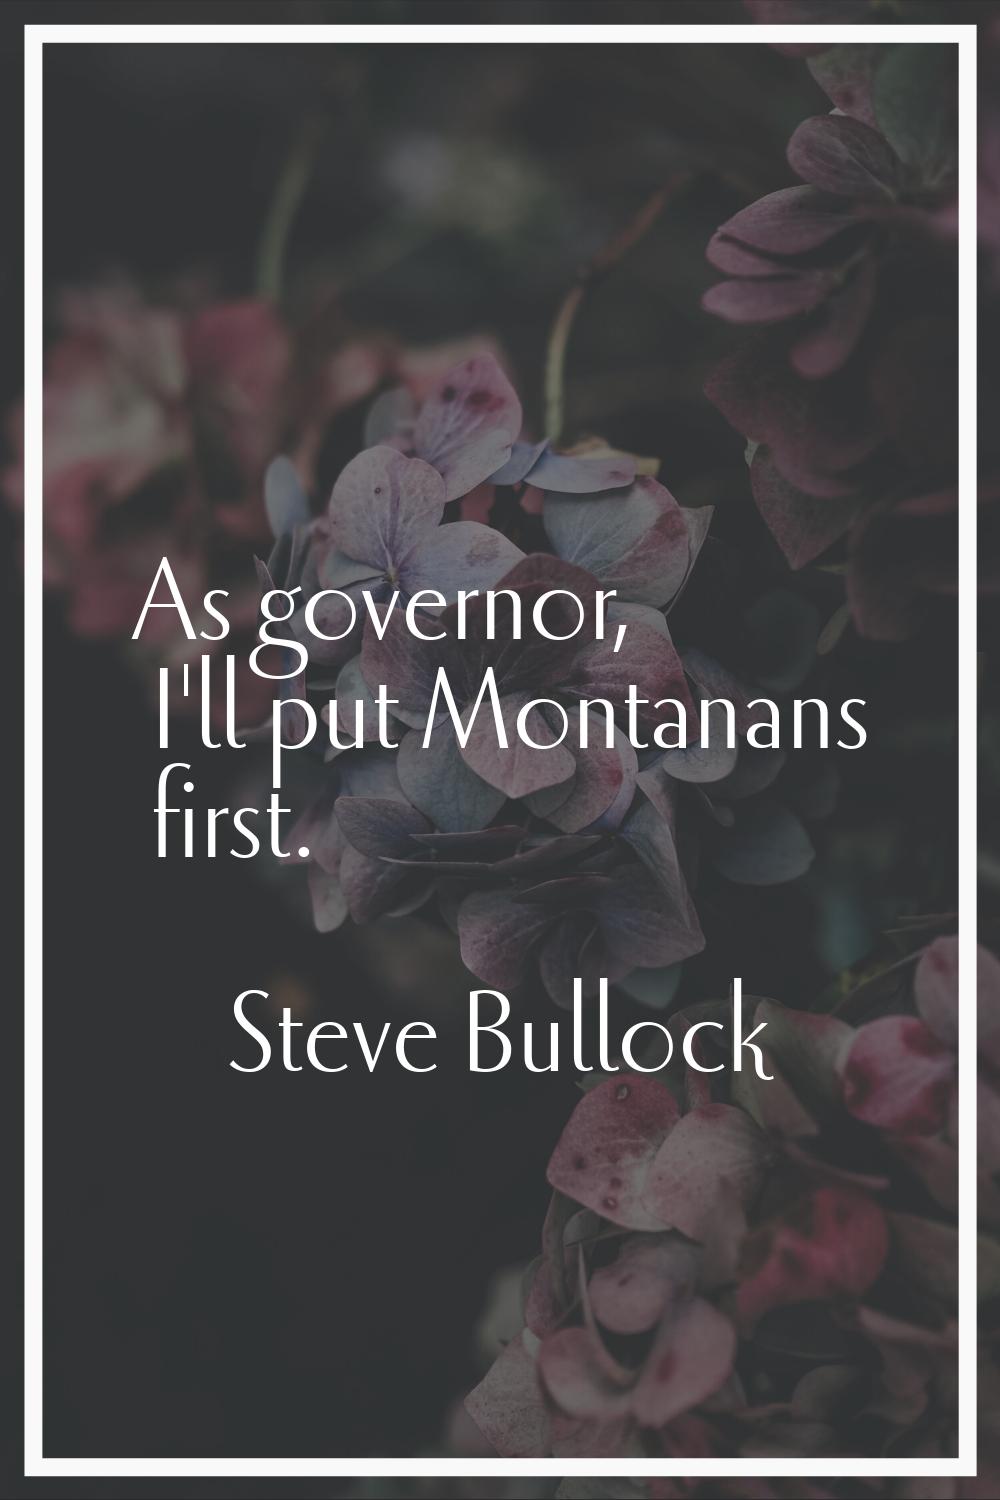 As governor, I'll put Montanans first.